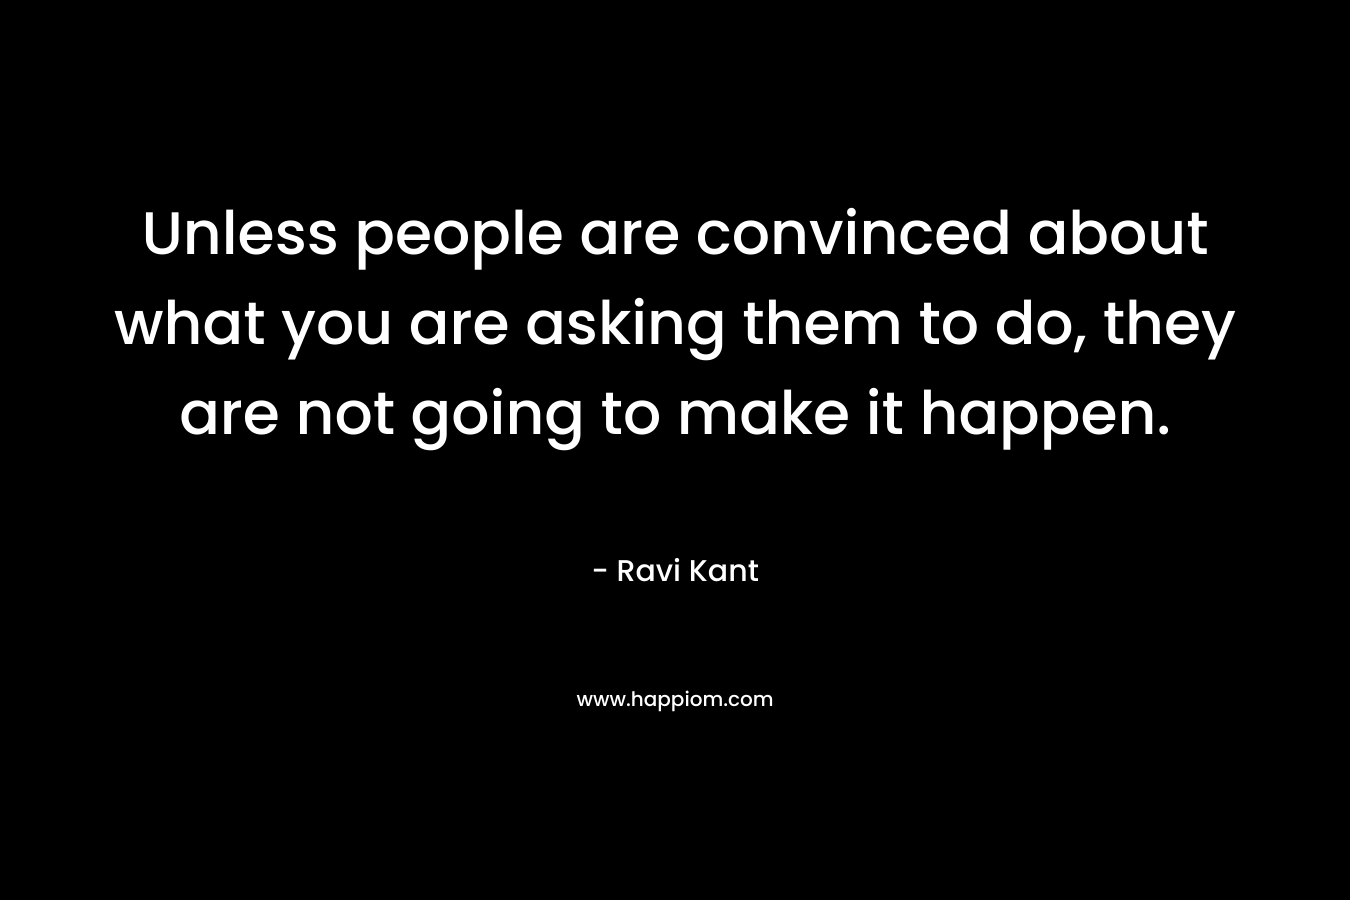 Unless people are convinced about what you are asking them to do, they are not going to make it happen.